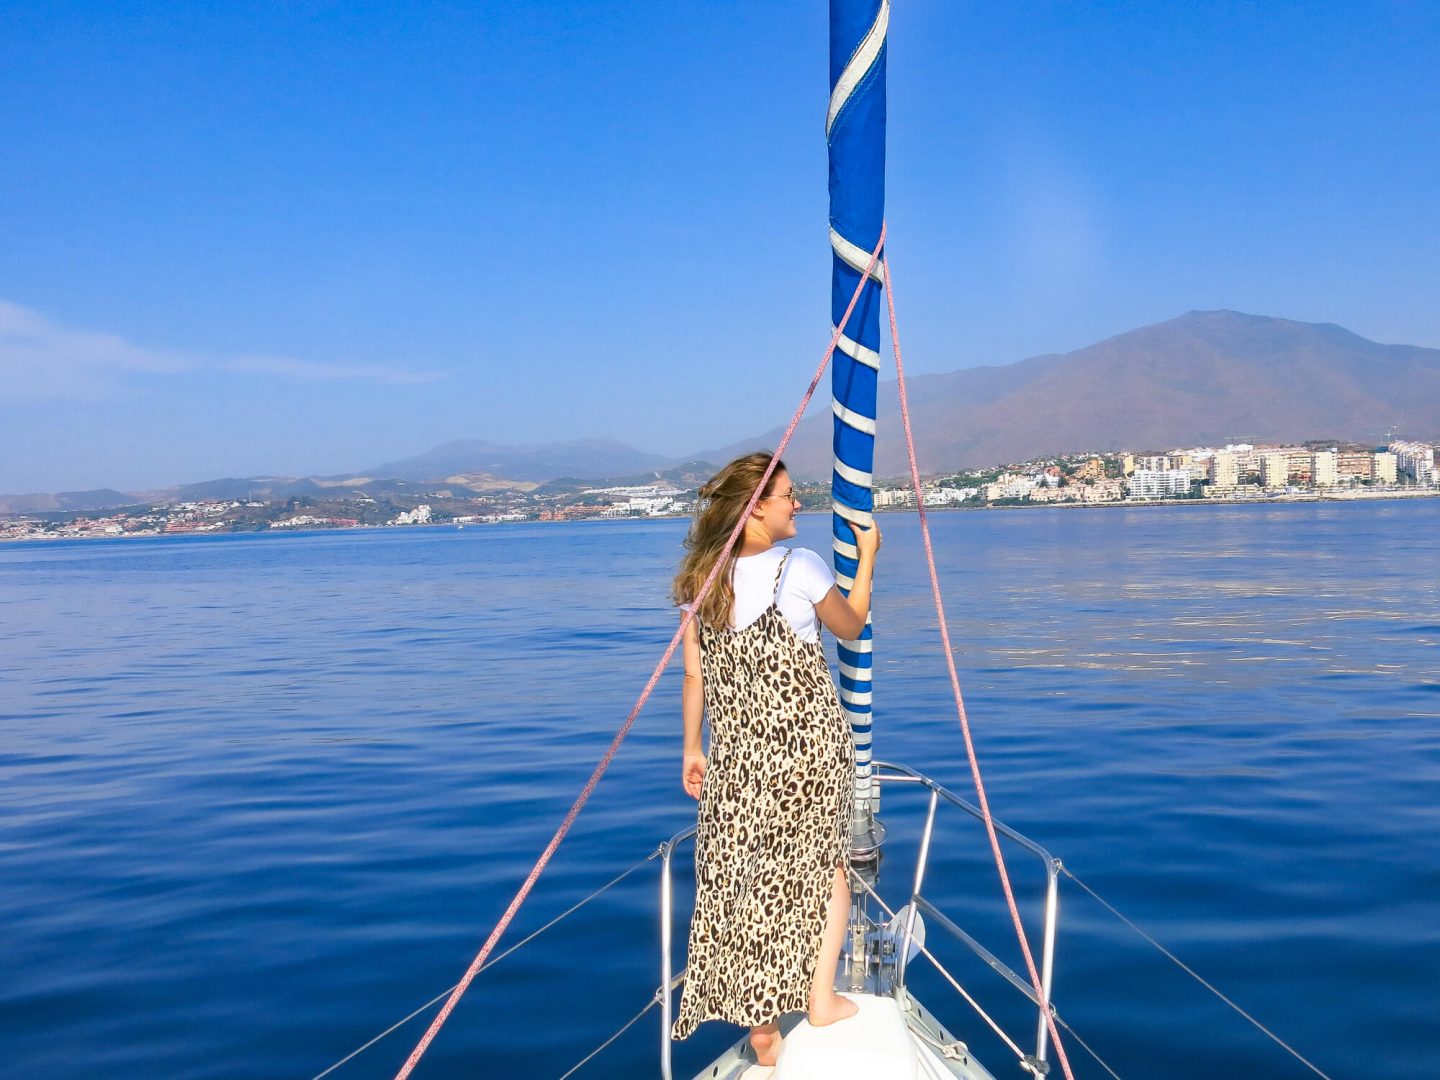 Woman on a boat, trying to spot dolphins off the shore of Andalusia. One of the day trips offered by Kempinski Hotel Bahía, Spain 